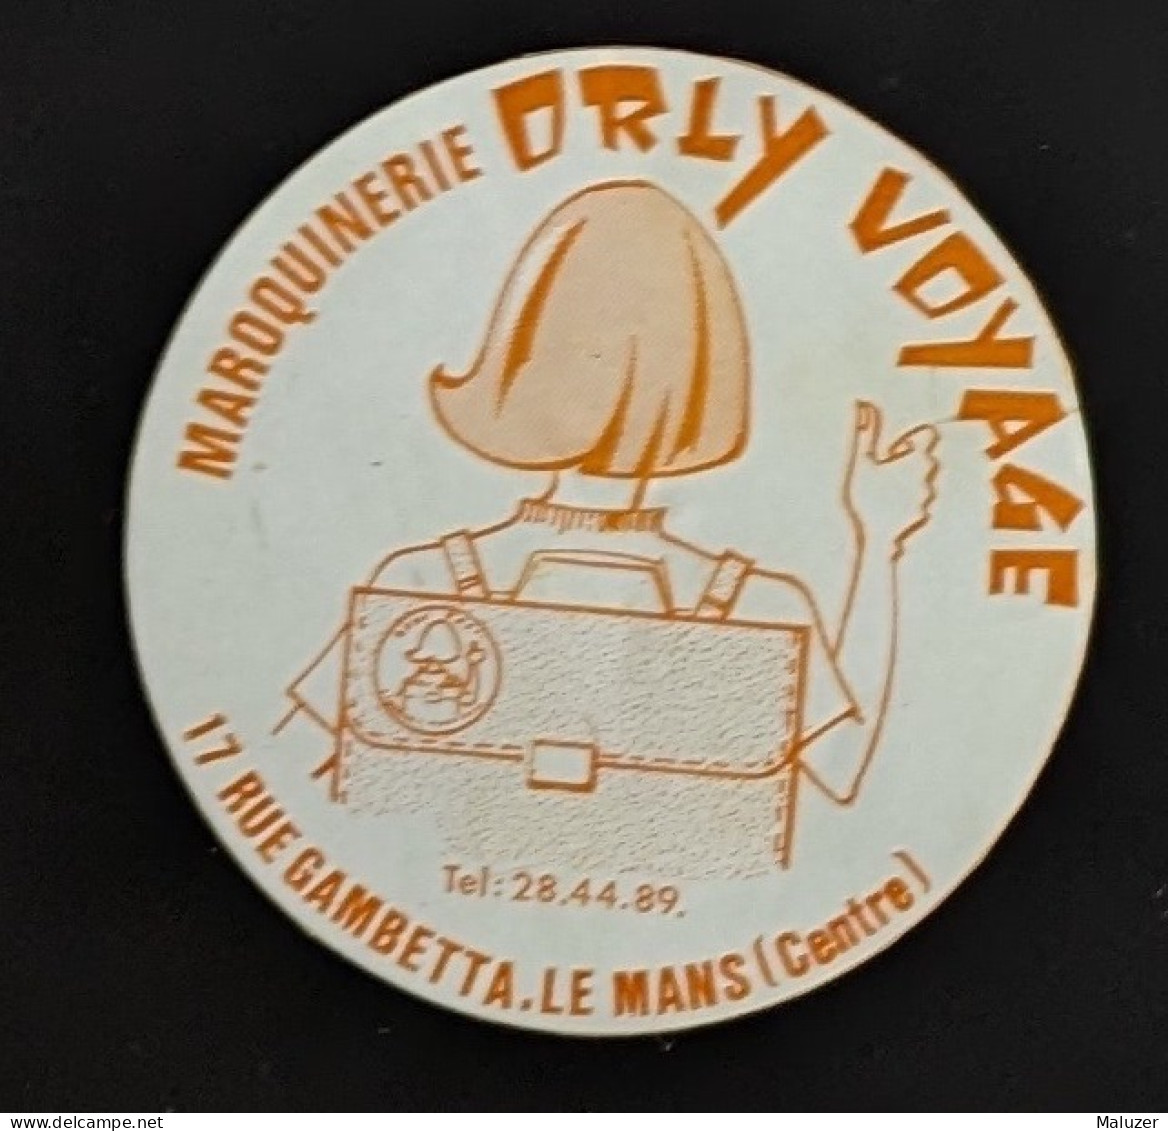 AUTOCOLLANT MAROQUINERIE ORLY VOYAGE - LE MANS 72 SARTHE - MAGASIN COMMERCE - CARTABLE - Stickers